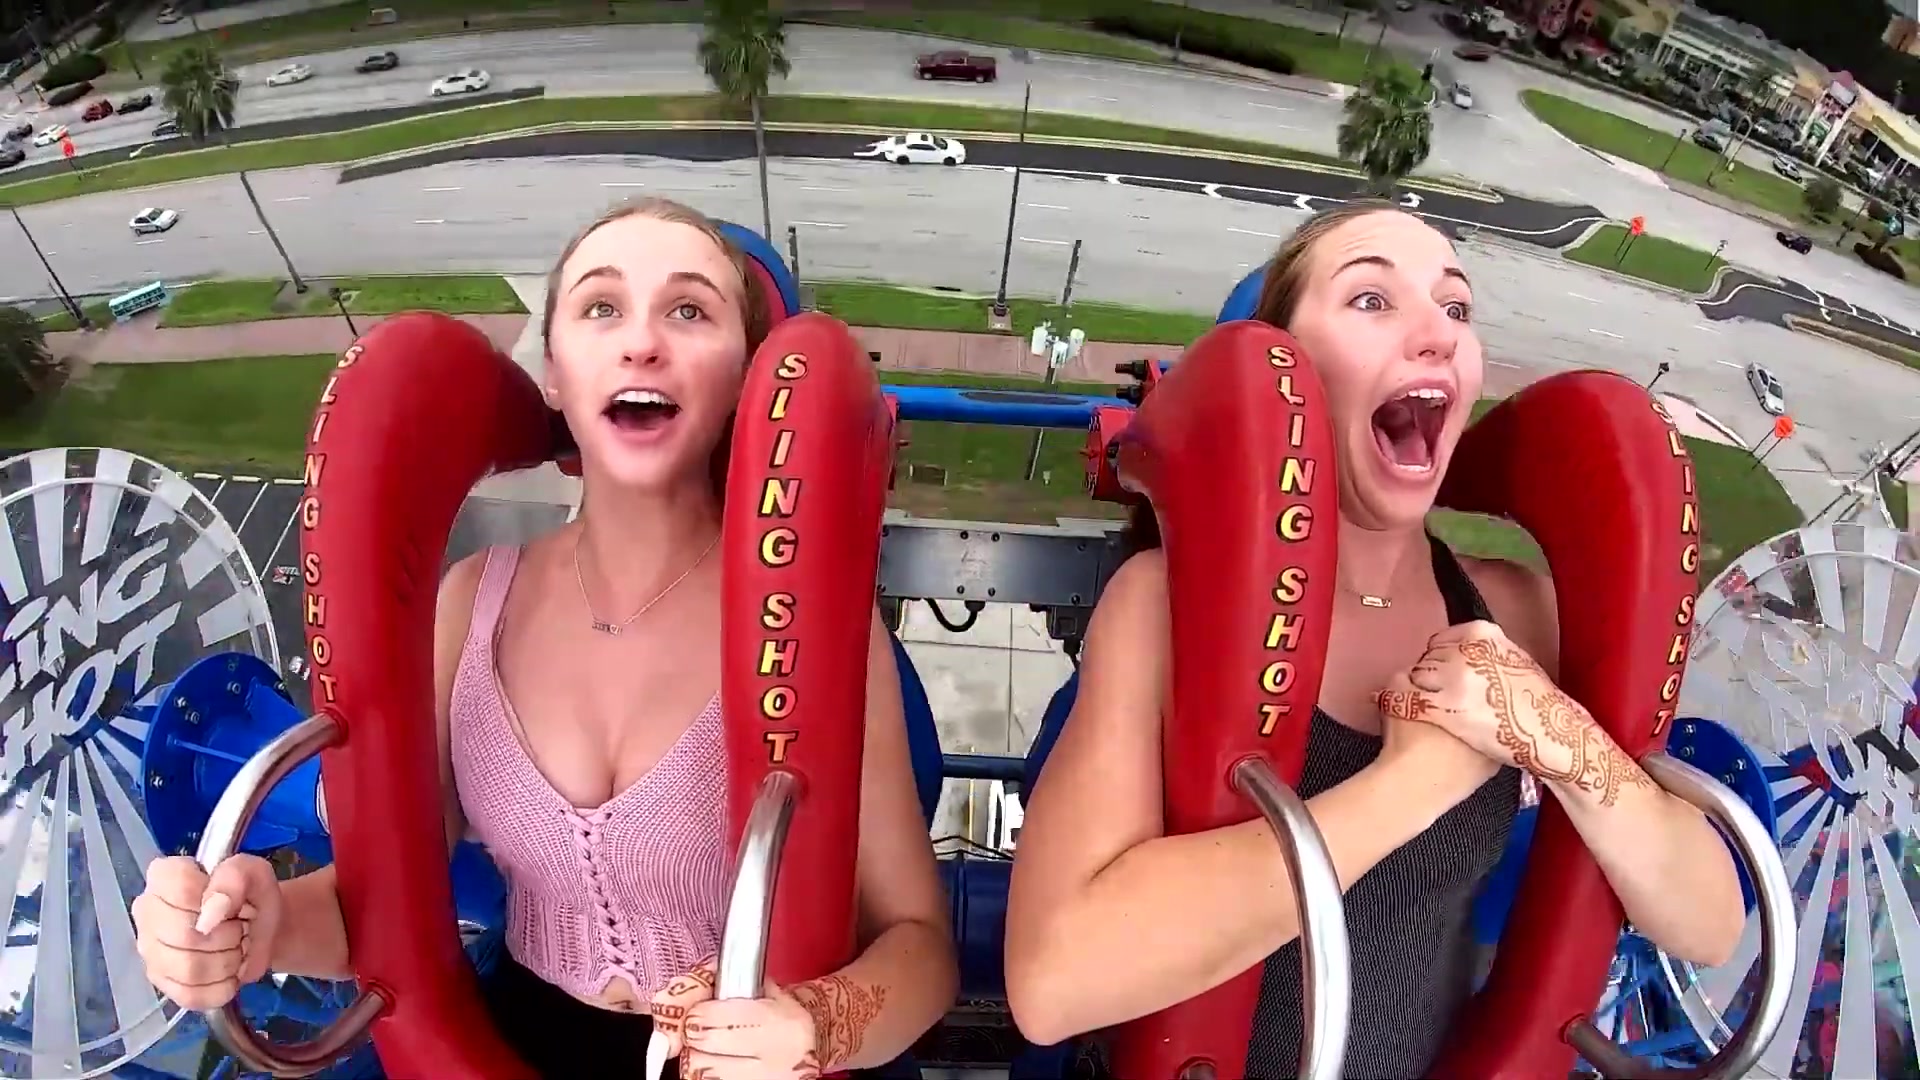 Bare-boobed fun: the best of the sling shot ride